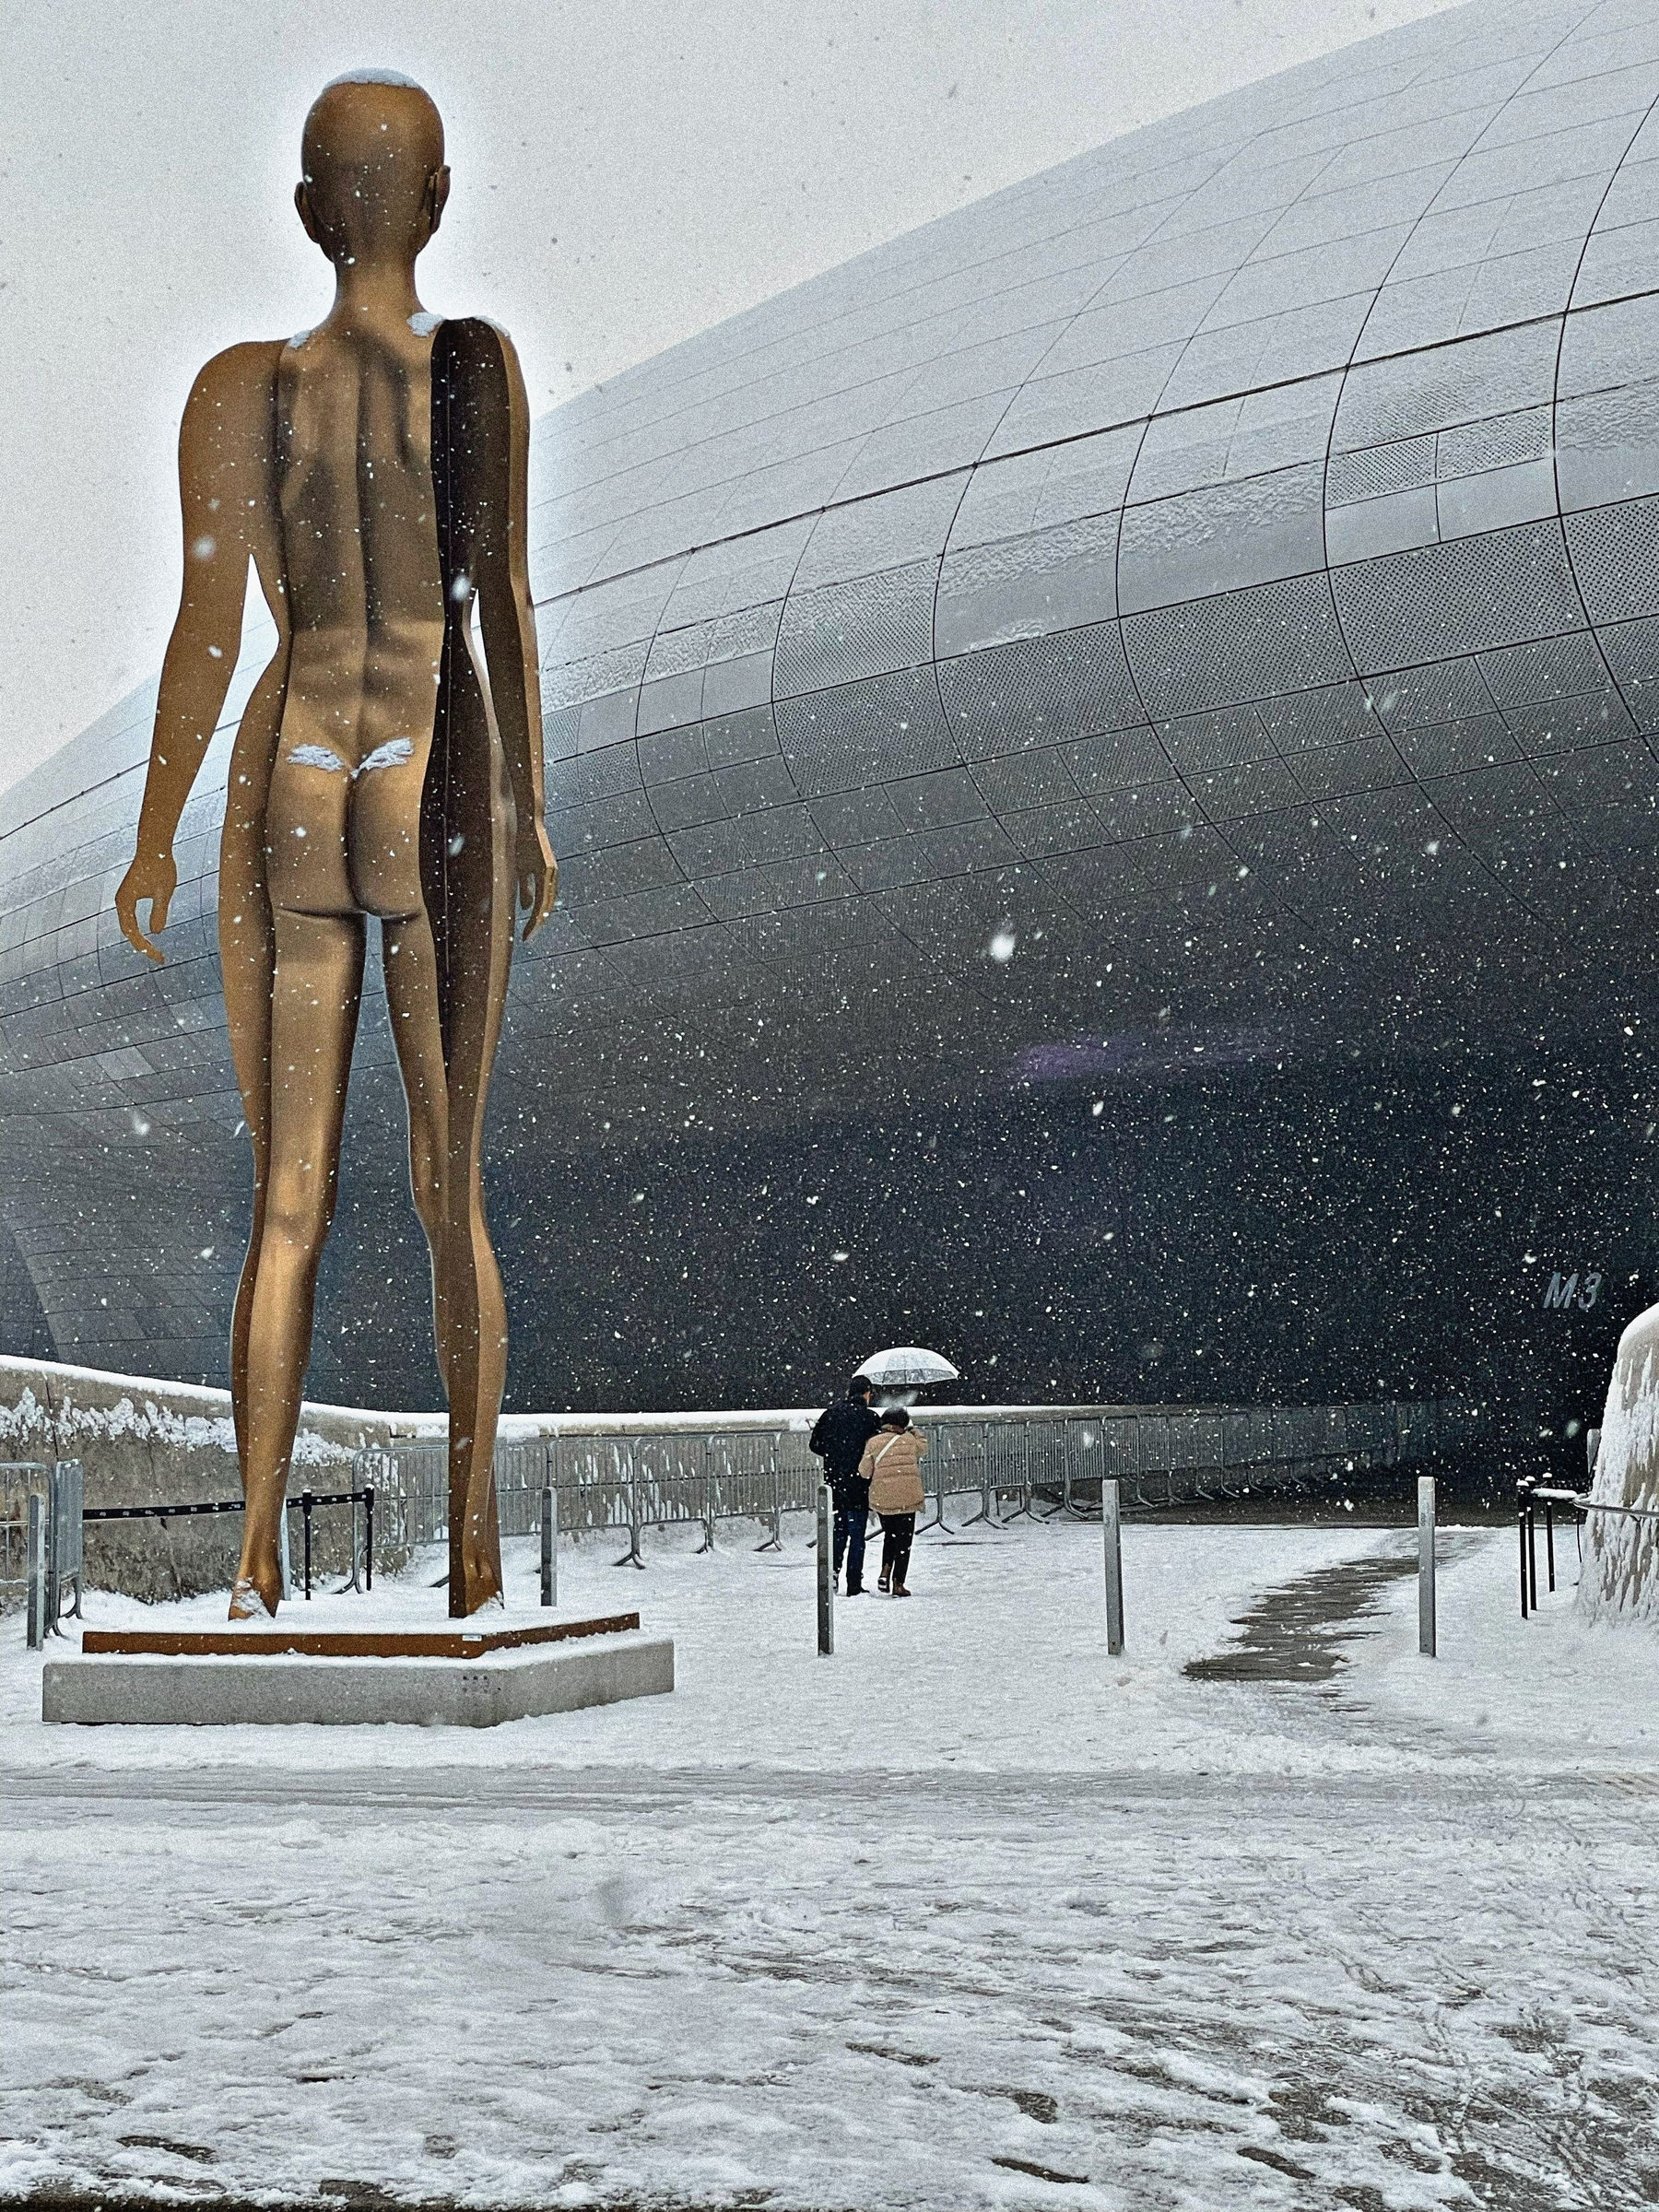 A tall sculpture of a naked lady beside the very futuristic dome of the Dongdaemun Design Plaza. Snow continues to fall.